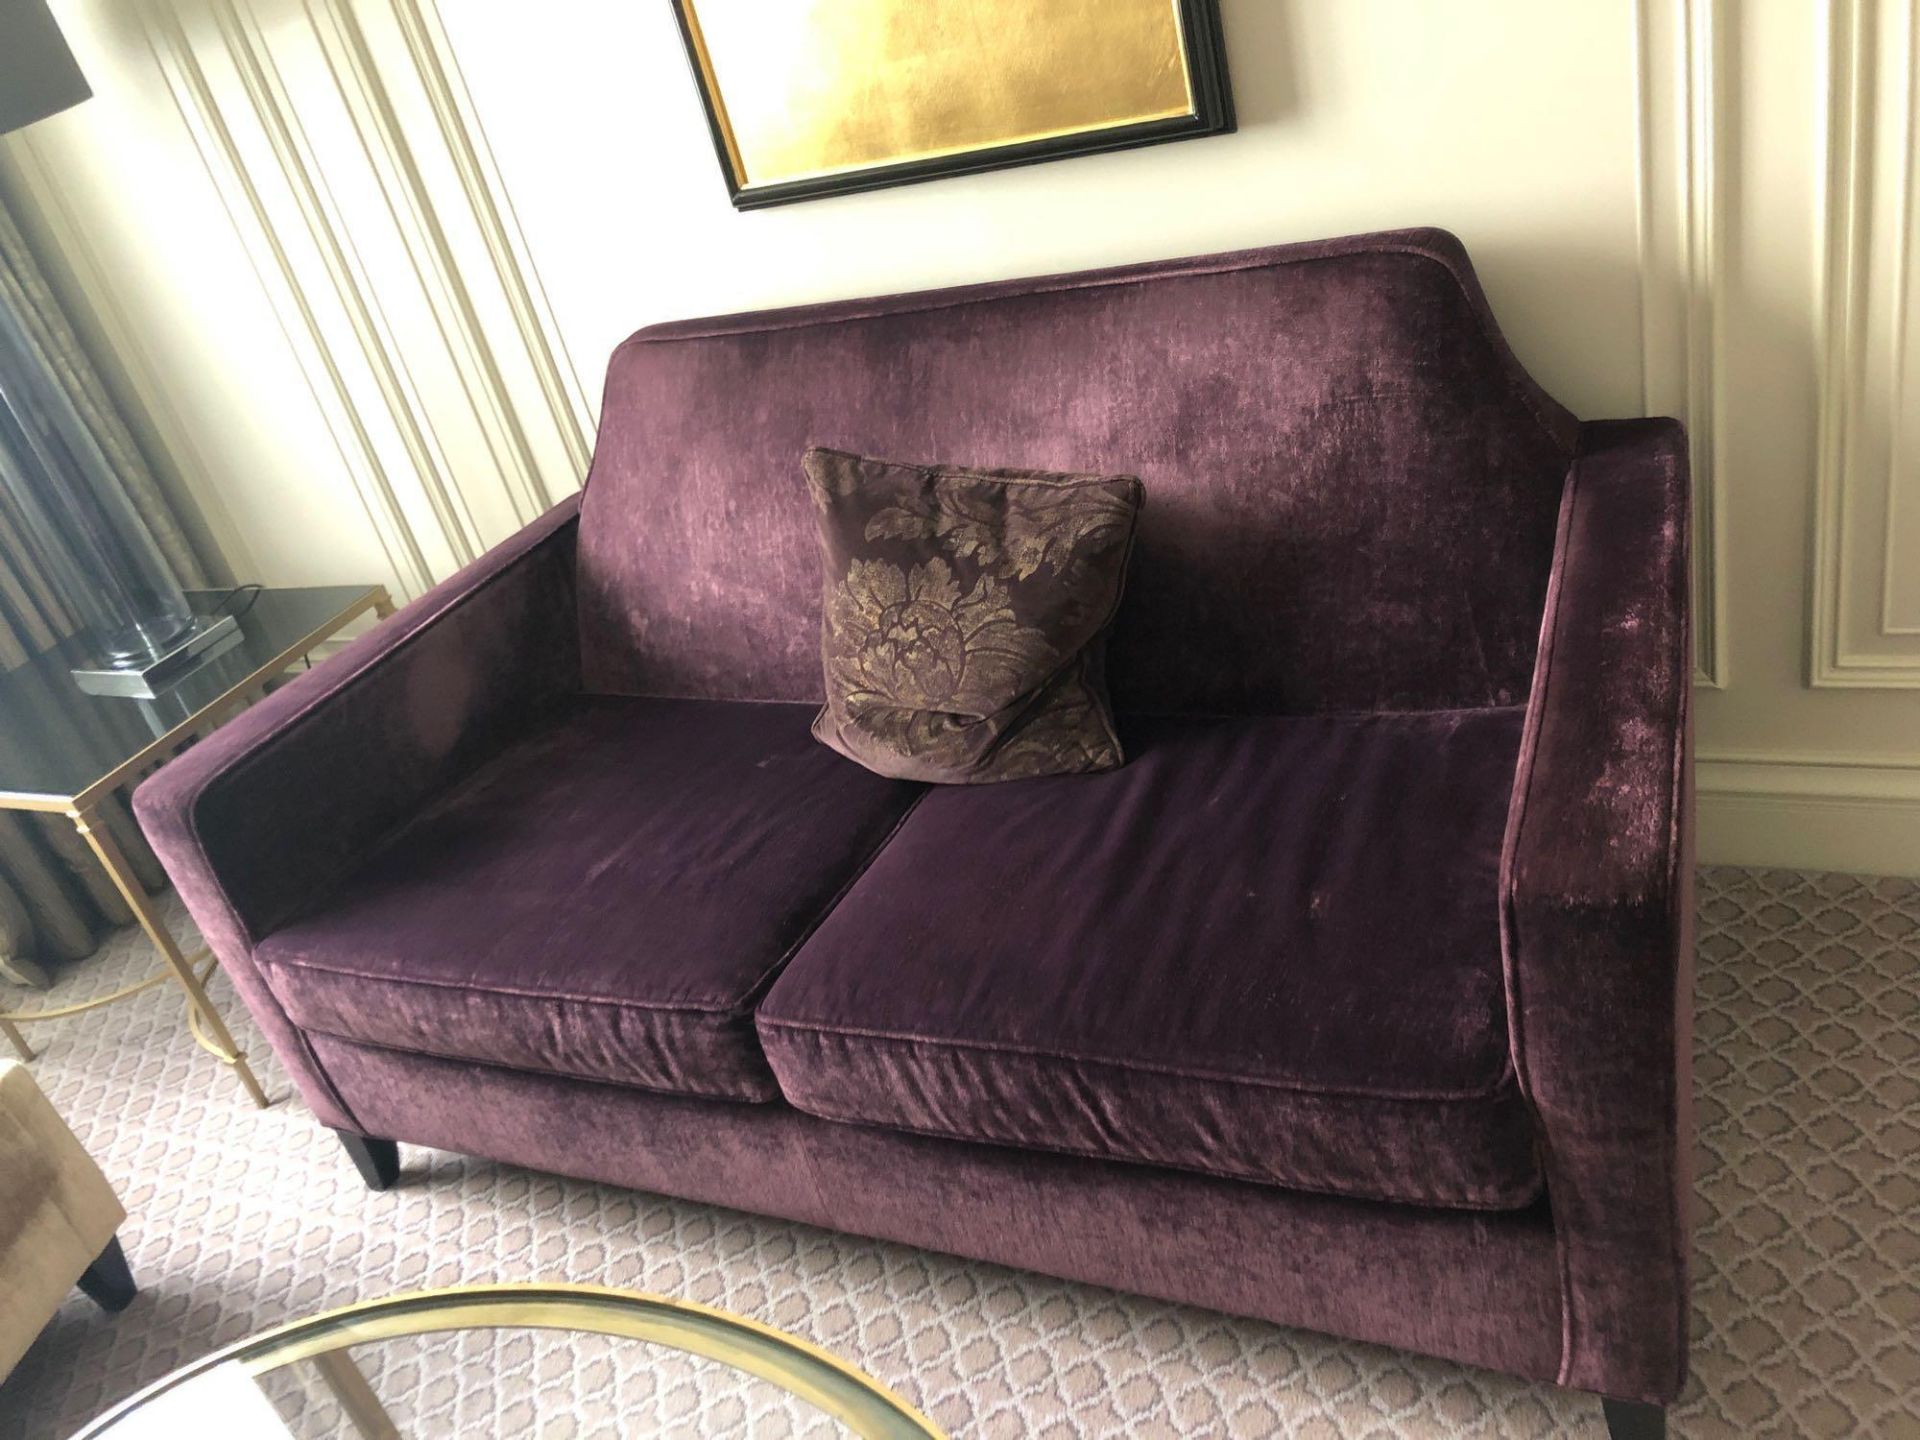 A Contemporary Seater Sofa In Mauve Upholstery With Square Arms With Scatter Cushions 260 x 80 x